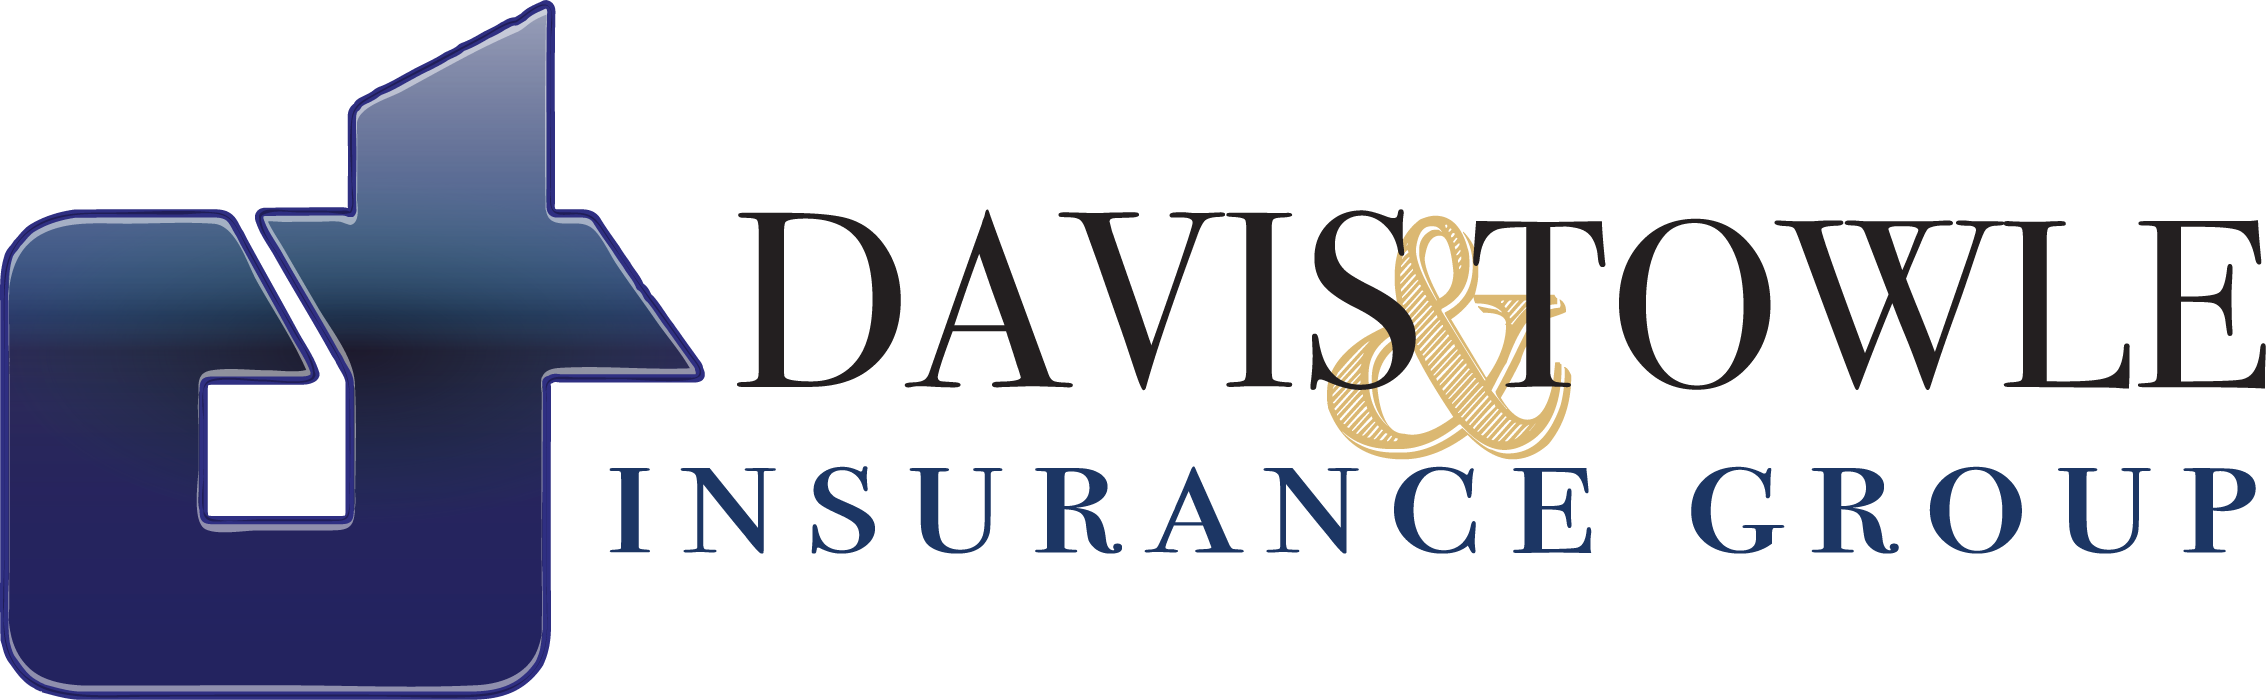 Davis & Towle Insurance Group/ Forest Products Division